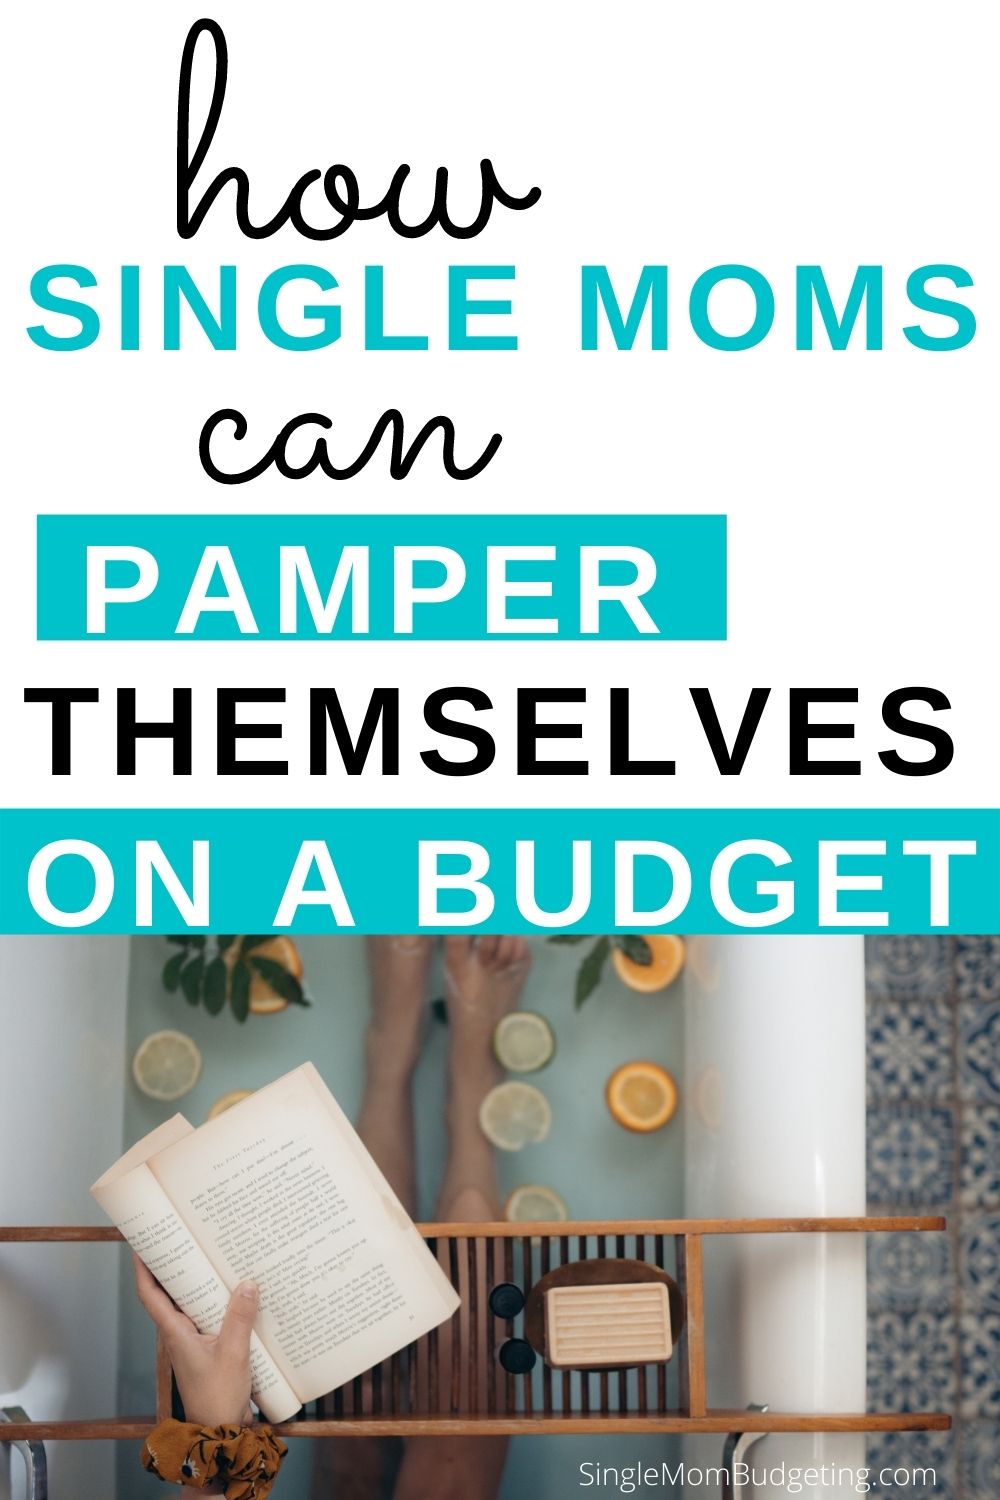 Here are some tips and ideas for how you can pamper yourself as a single mom, even when you're on a budget. 